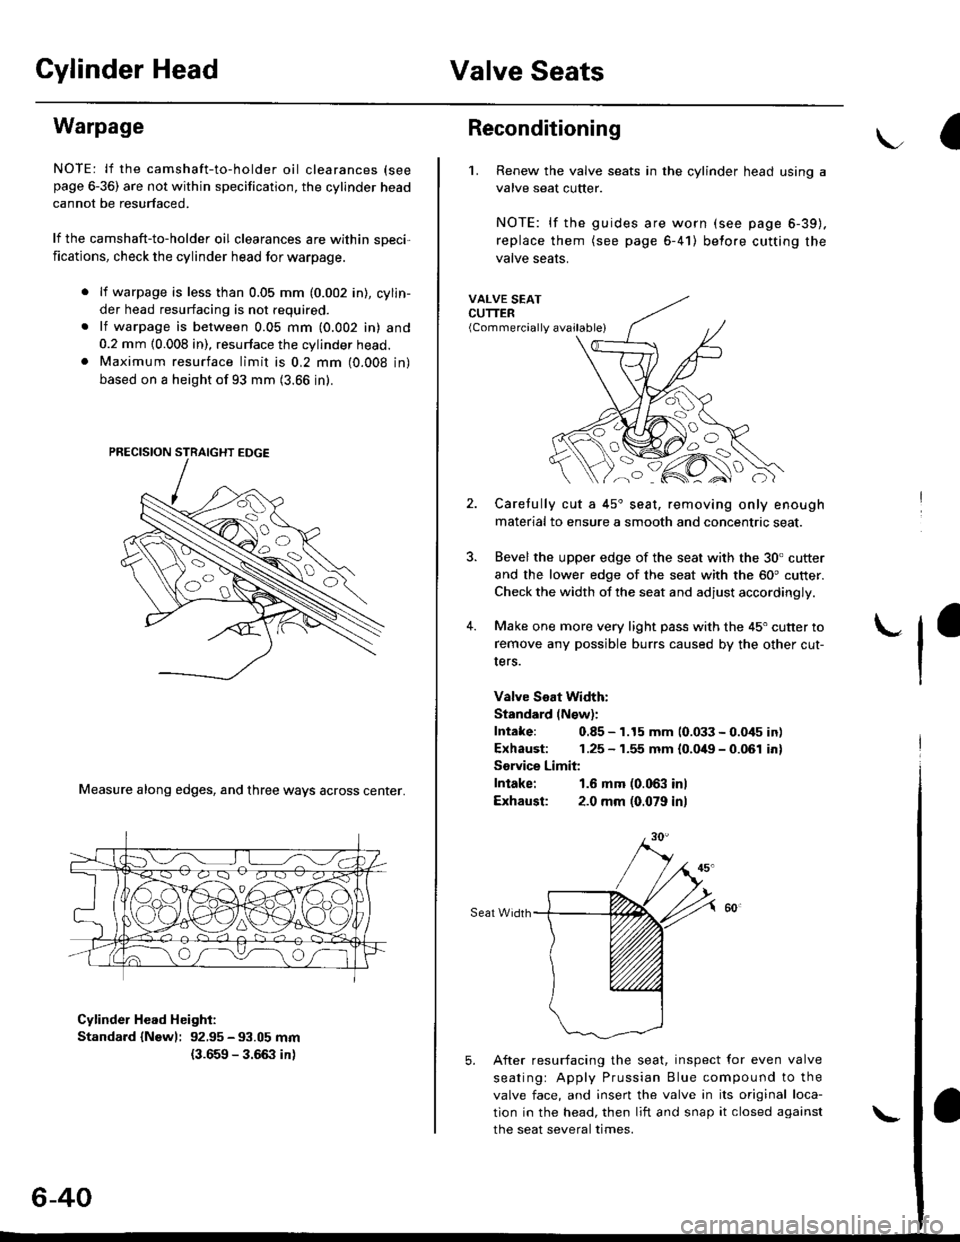 HONDA CIVIC 1996 6.G Owners Manual Cylinder HeadValve Seats
Warpage
NOTE: lf the camshaft-to-holder oil clearances (see
page 6-36) are not within specification, the cylinder head
cannot be resurfaced.
lf the camshaft-to-holder oil clea